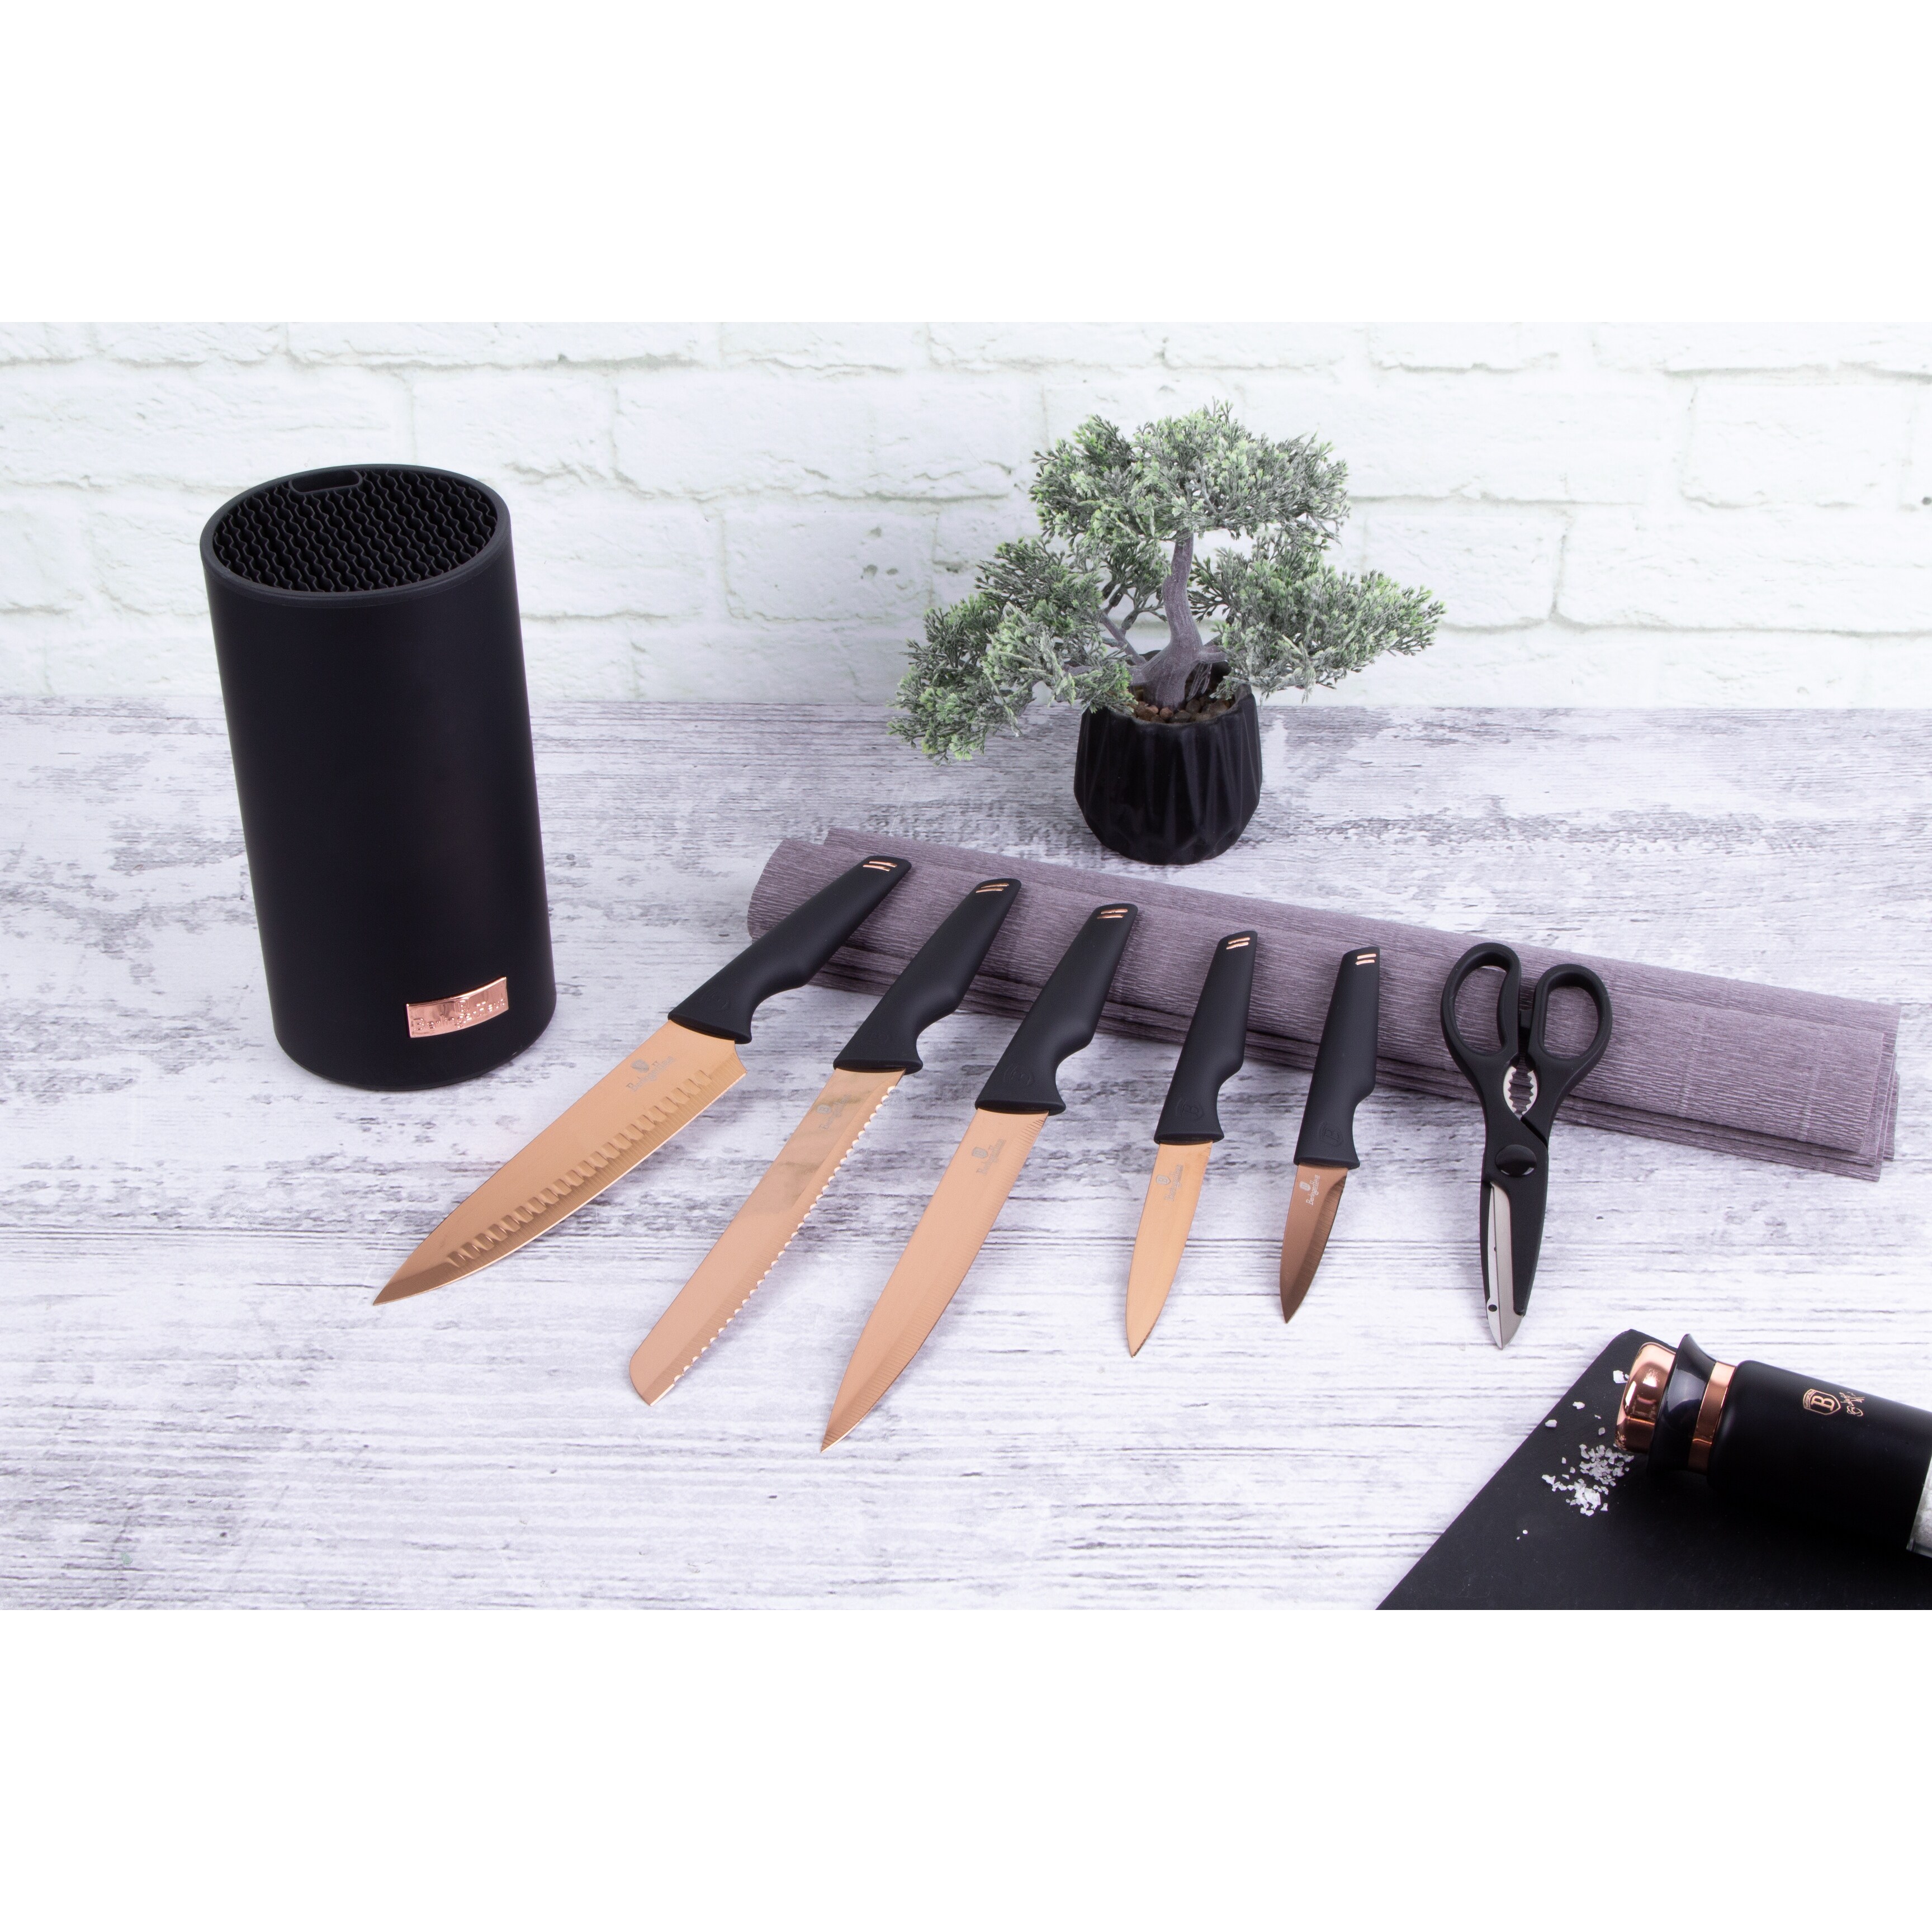 https://ak1.ostkcdn.com/images/products/is/images/direct/6bbf95ca50042c9eda7ca1ea295ea448151f5942/Berlinger-Haus-7-Piece-Knife-Set-with-Stainless-Steel-Stand-Black-Rose.jpg